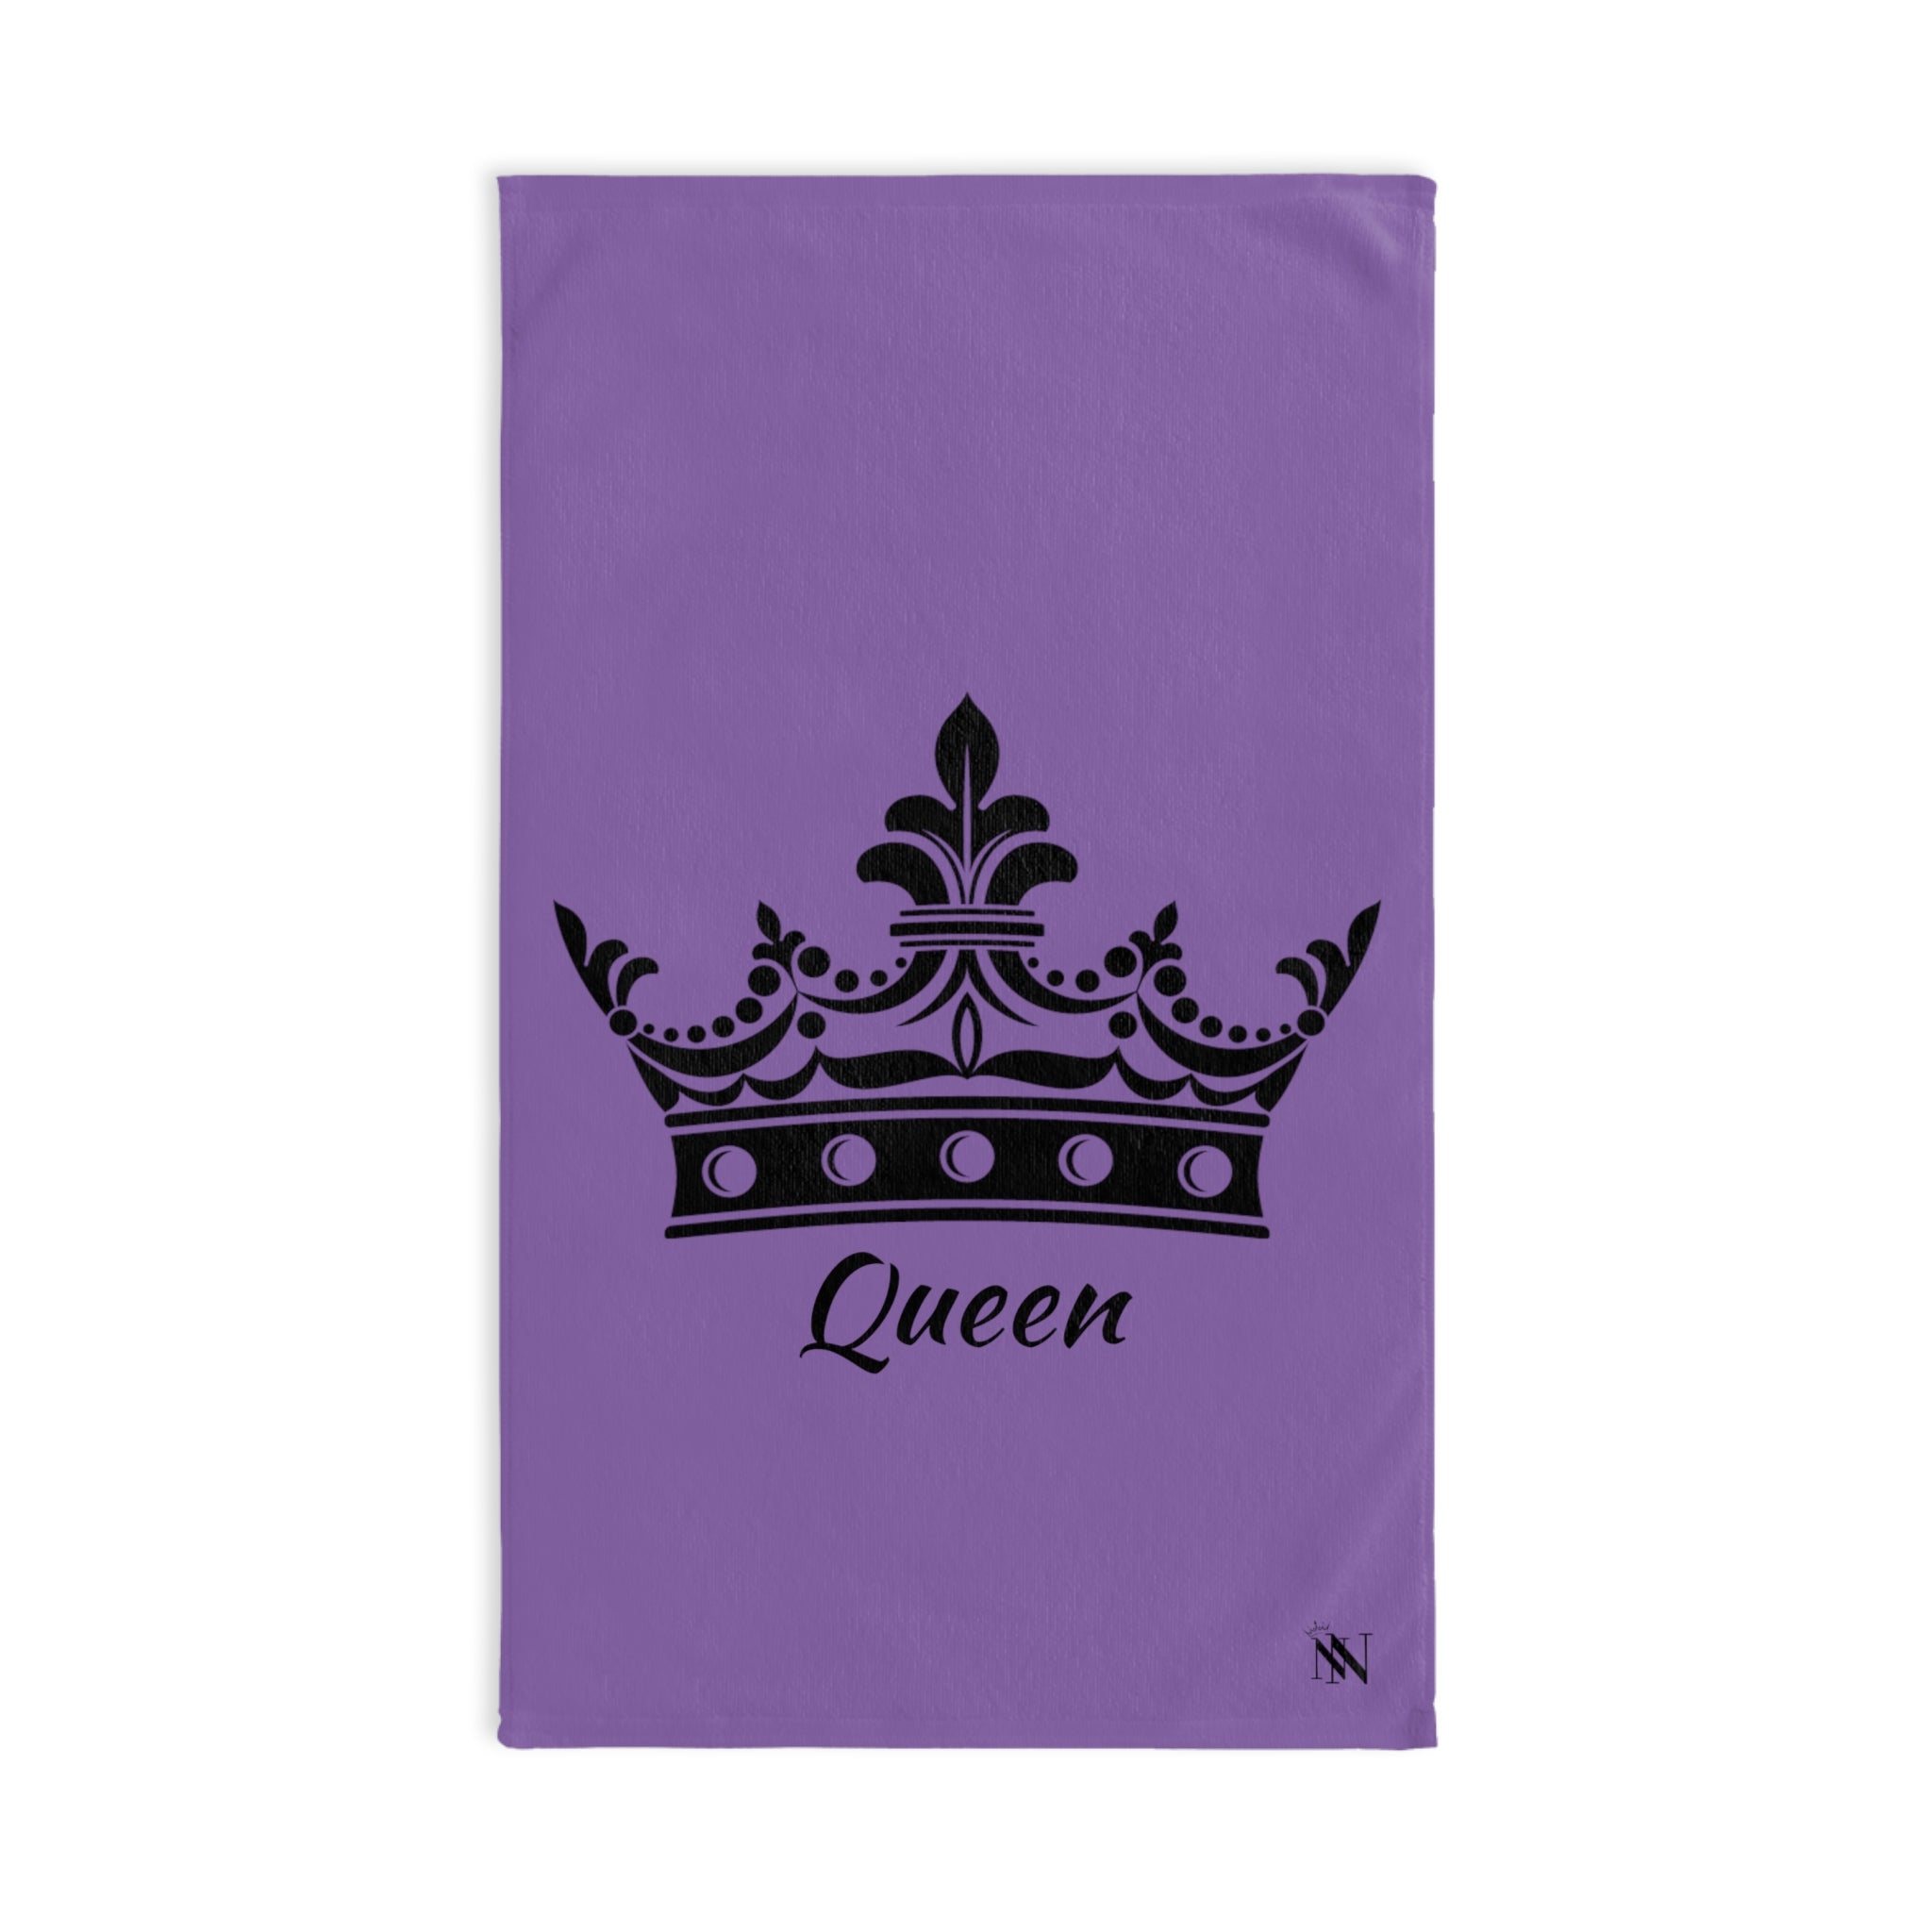 Queen Tiara Crown Lavendar | Funny Gifts for Men - Gifts for Him - Birthday Gifts for Men, Him, Husband, Boyfriend, New Couple Gifts, Fathers & Valentines Day Gifts, Hand Towels NECTAR NAPKINS